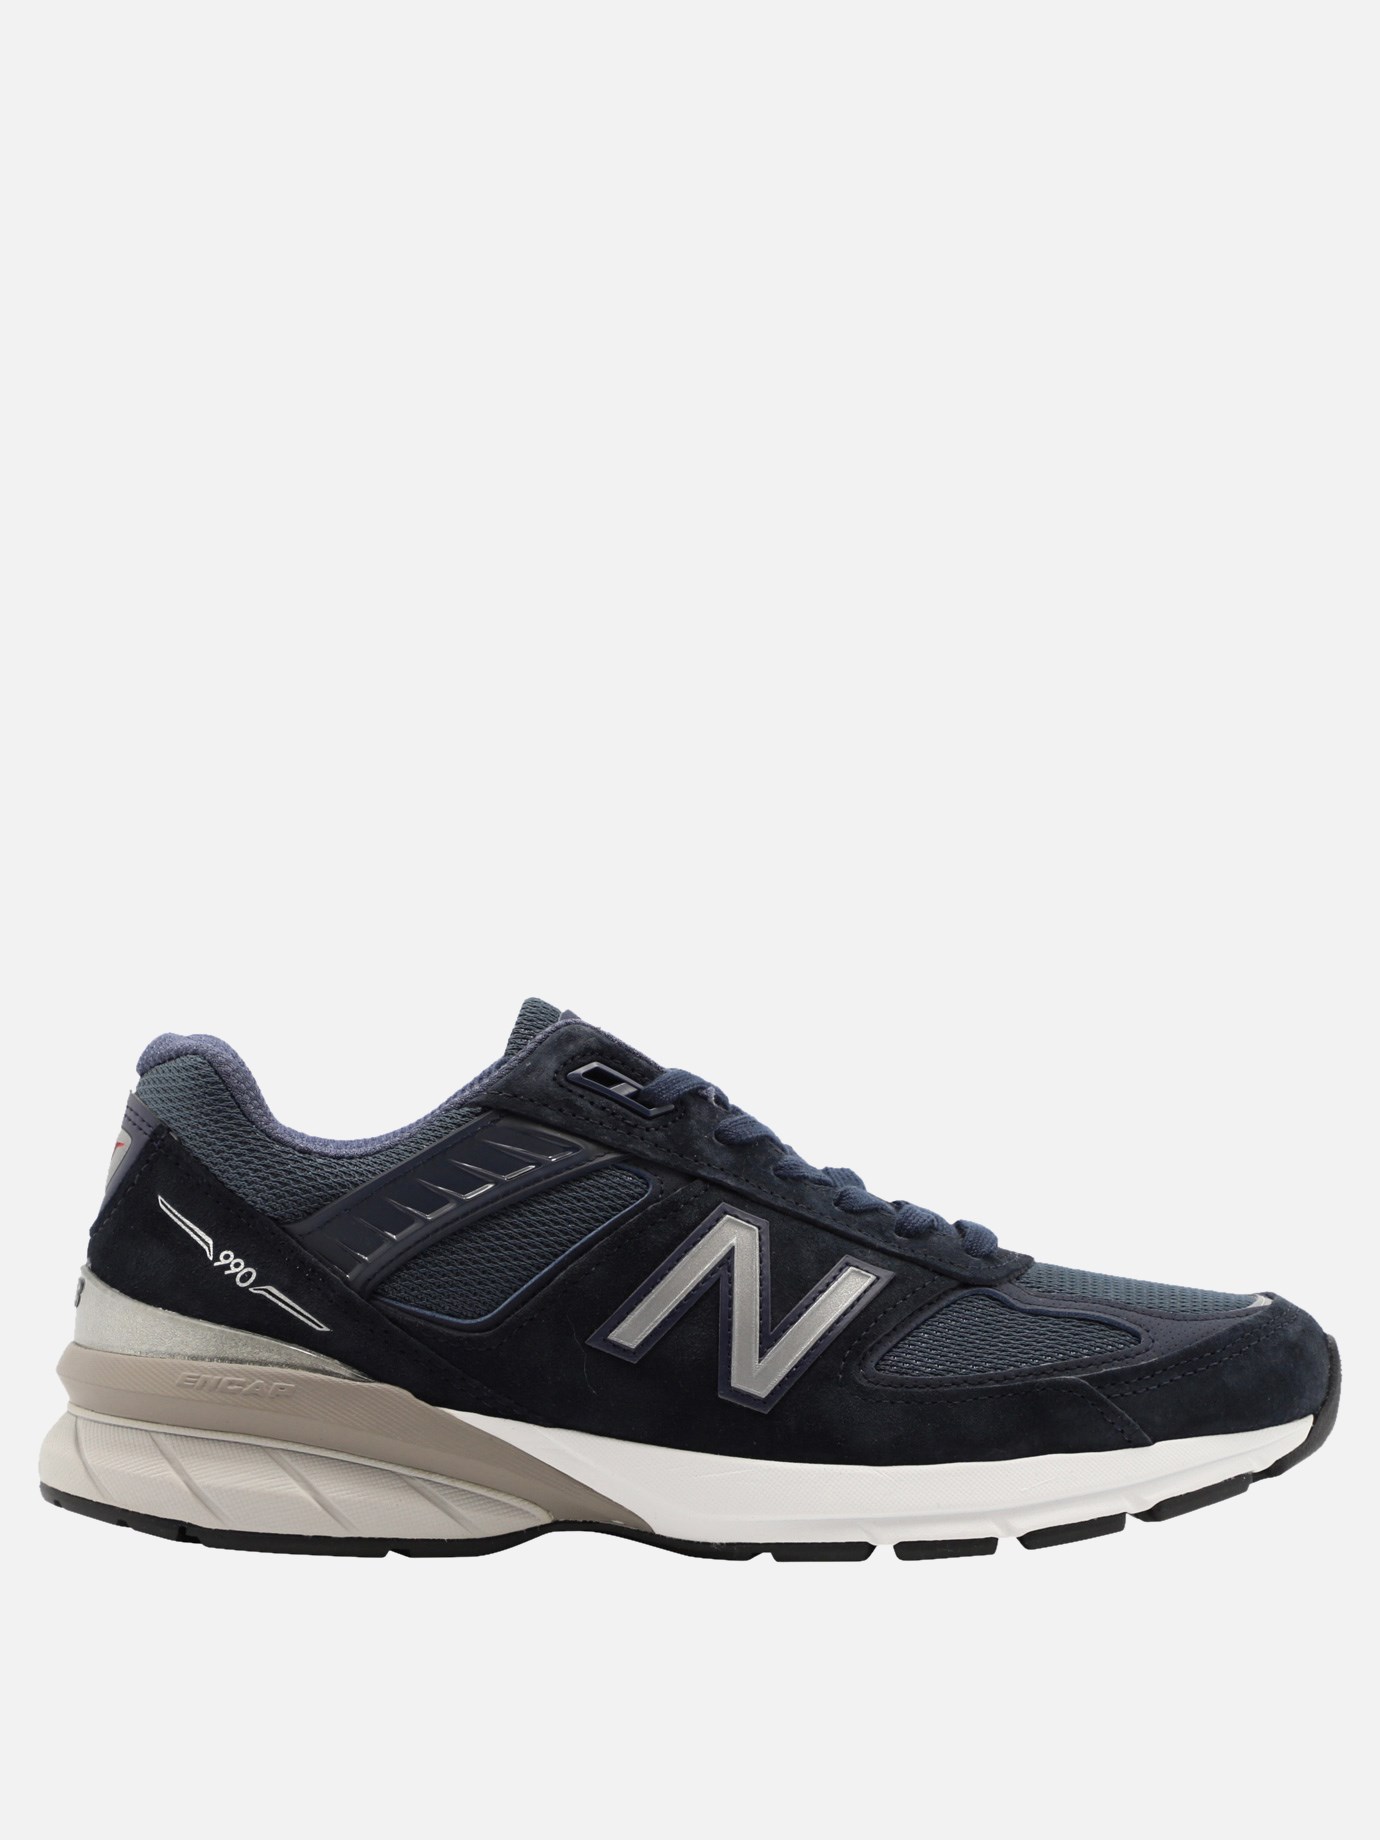  990V5  sneakersby New Balance - 2